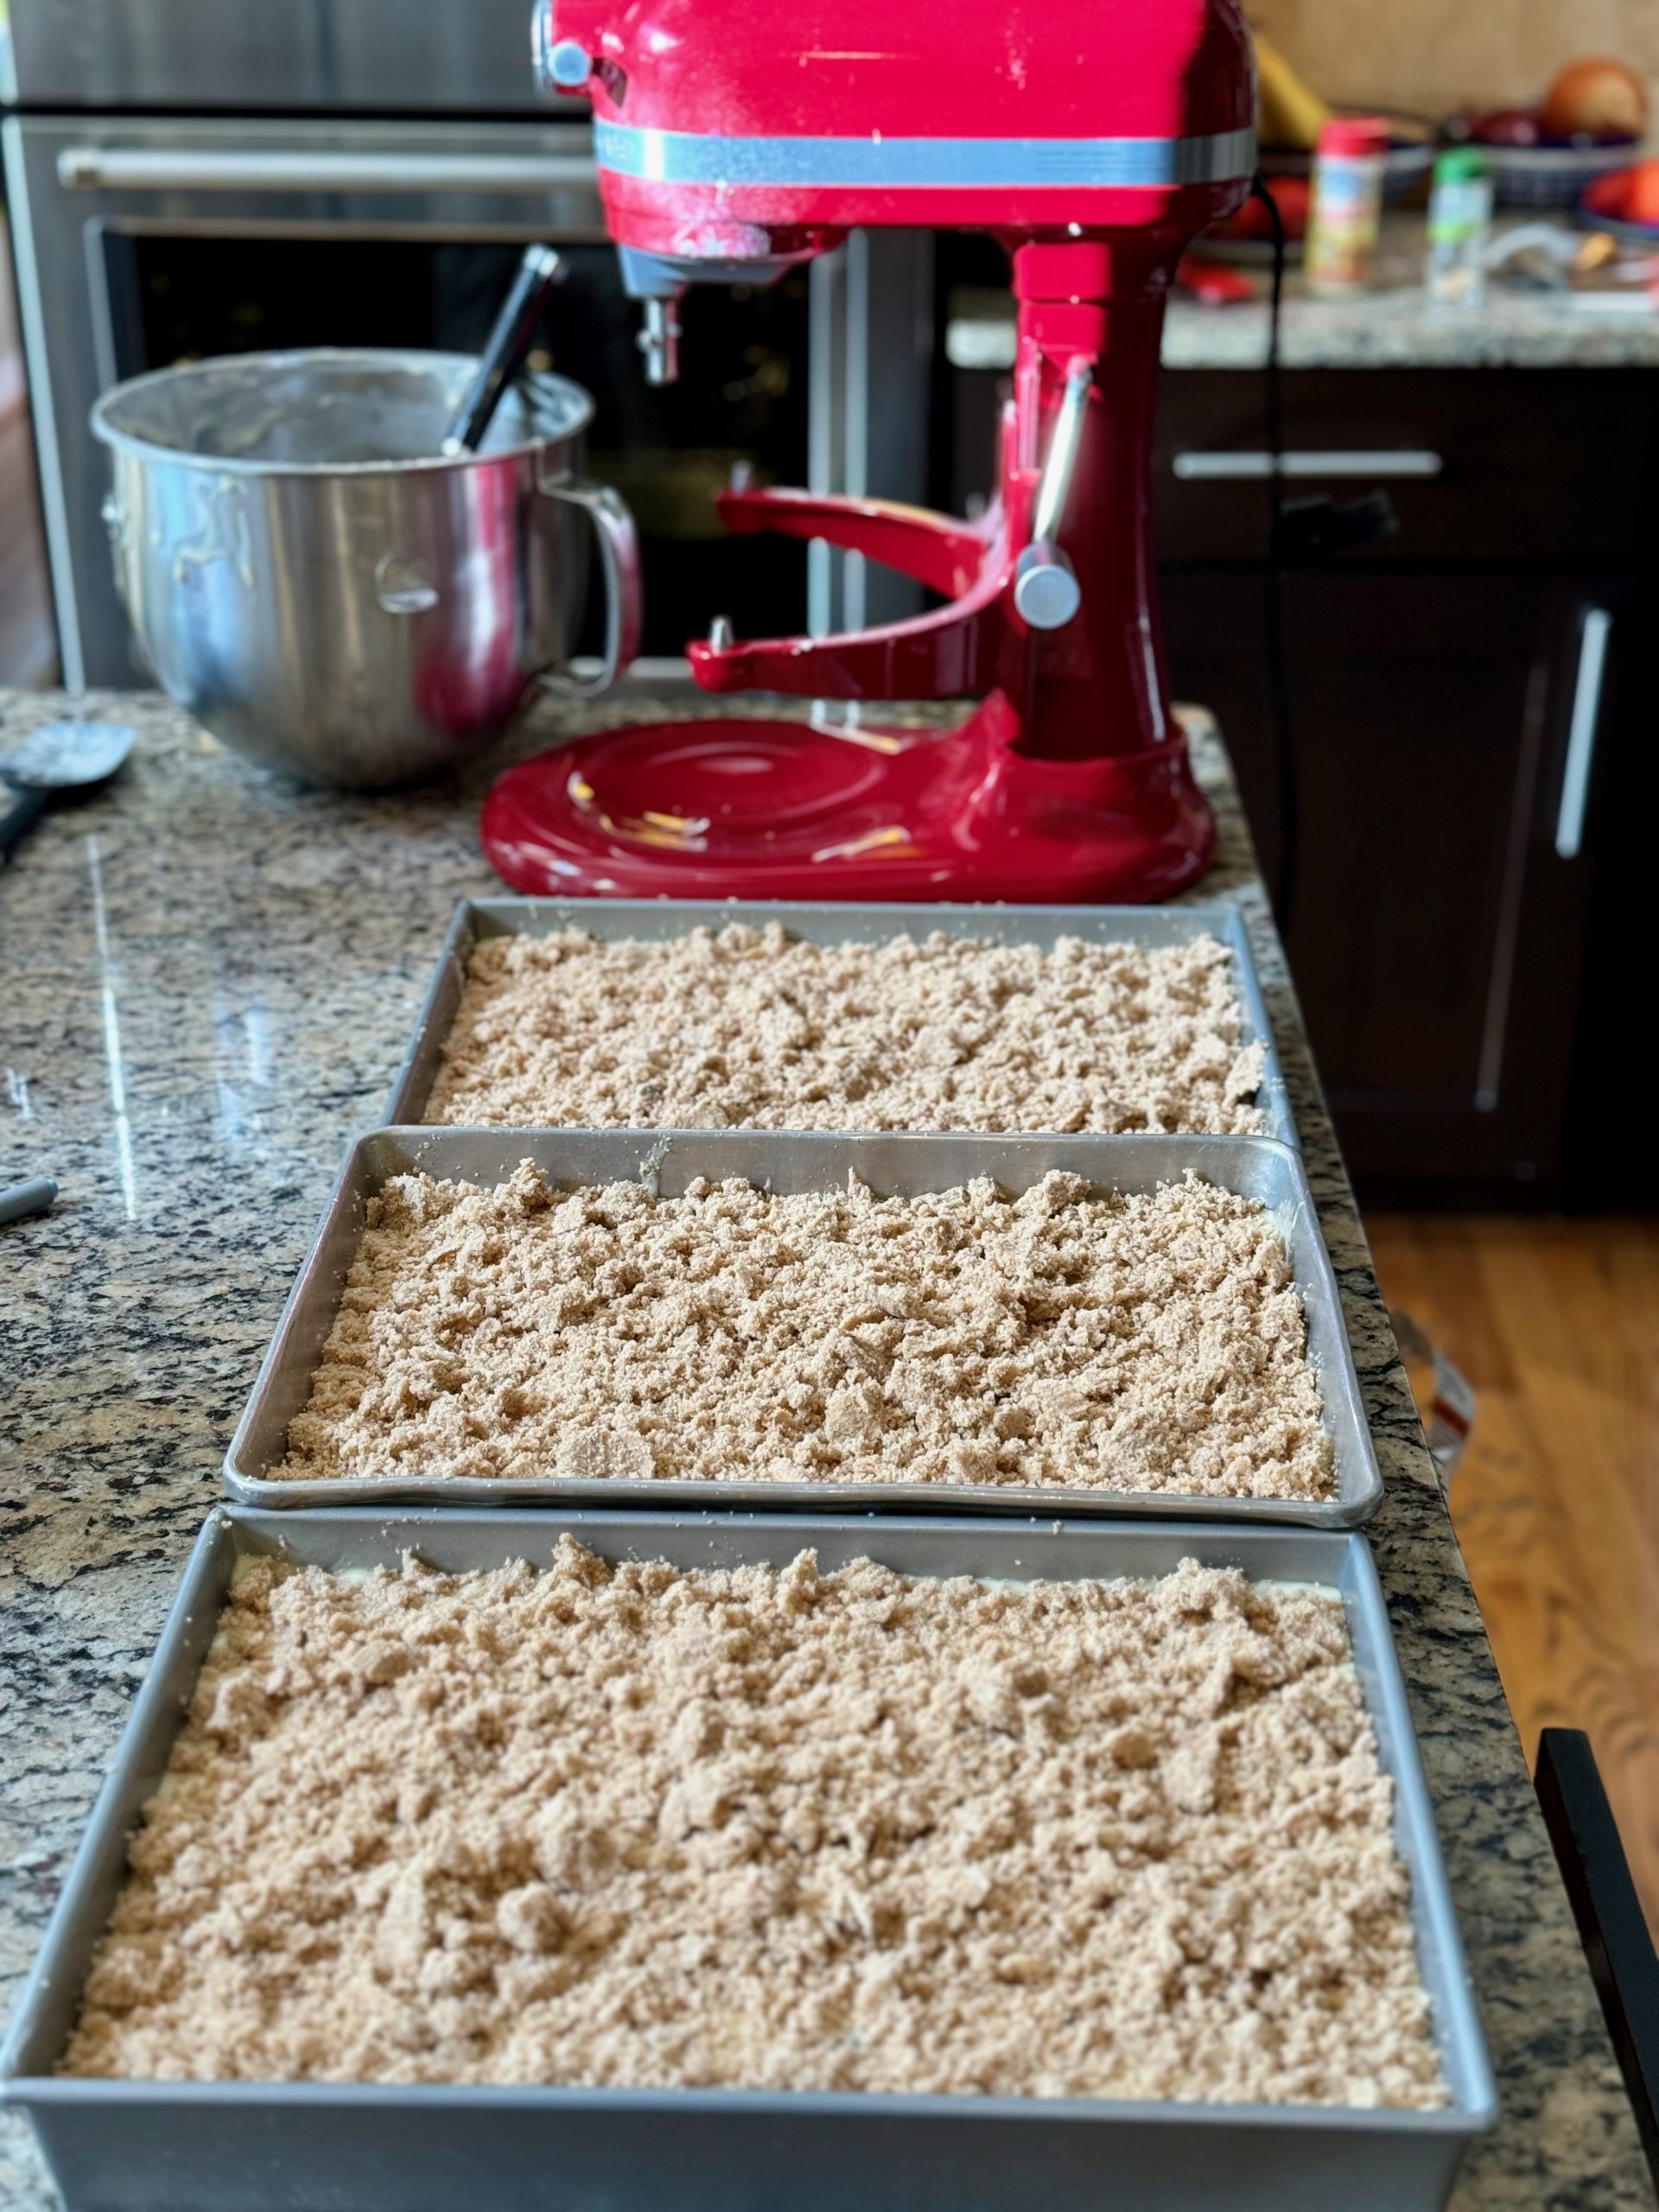 Vertical oriented photo with red 7 quart KitchenAid Stand Mixer in background and 3, 13 x 9 inch metal baking pans with coffee cake and brown sugar crumble ready to be baked.